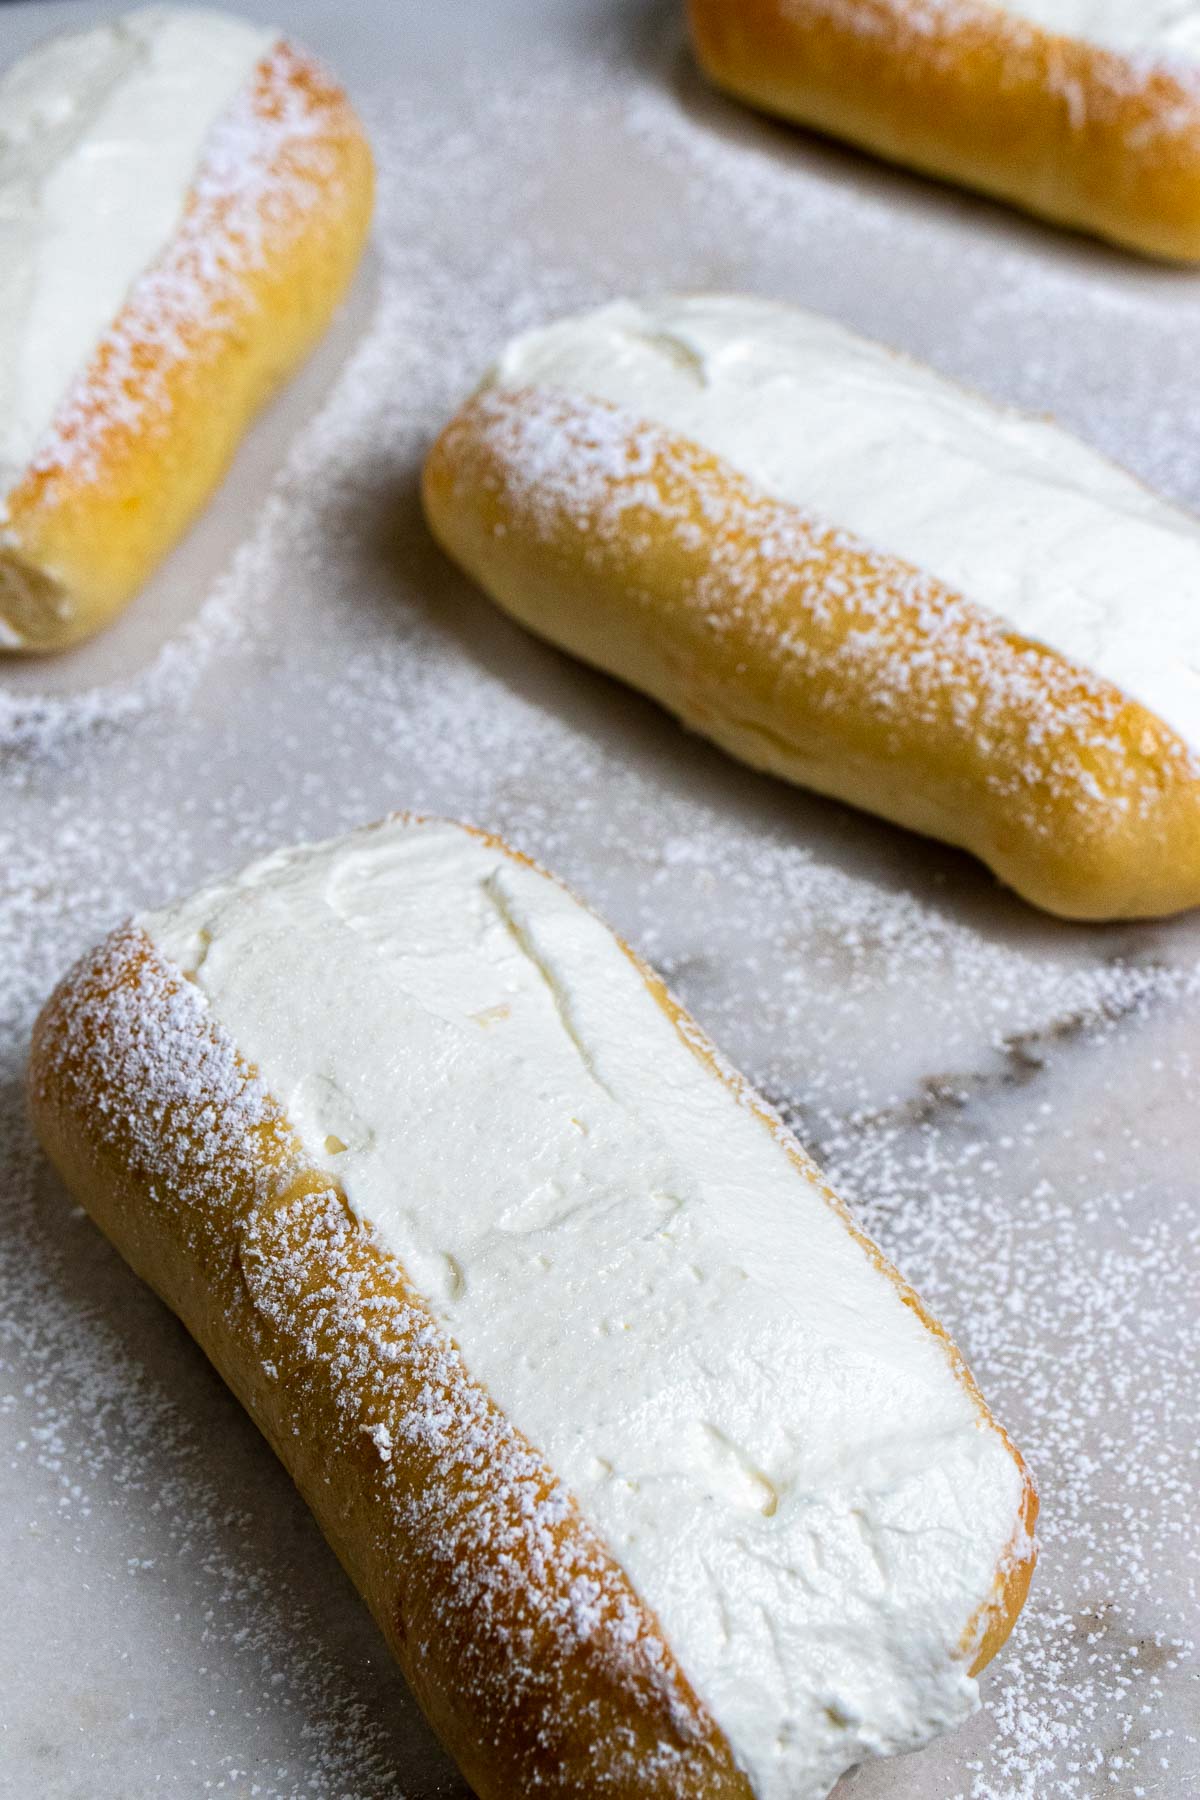 Roman maritozzi buns filled with whipped cream and dusted with powdered sugar on a marble counter.